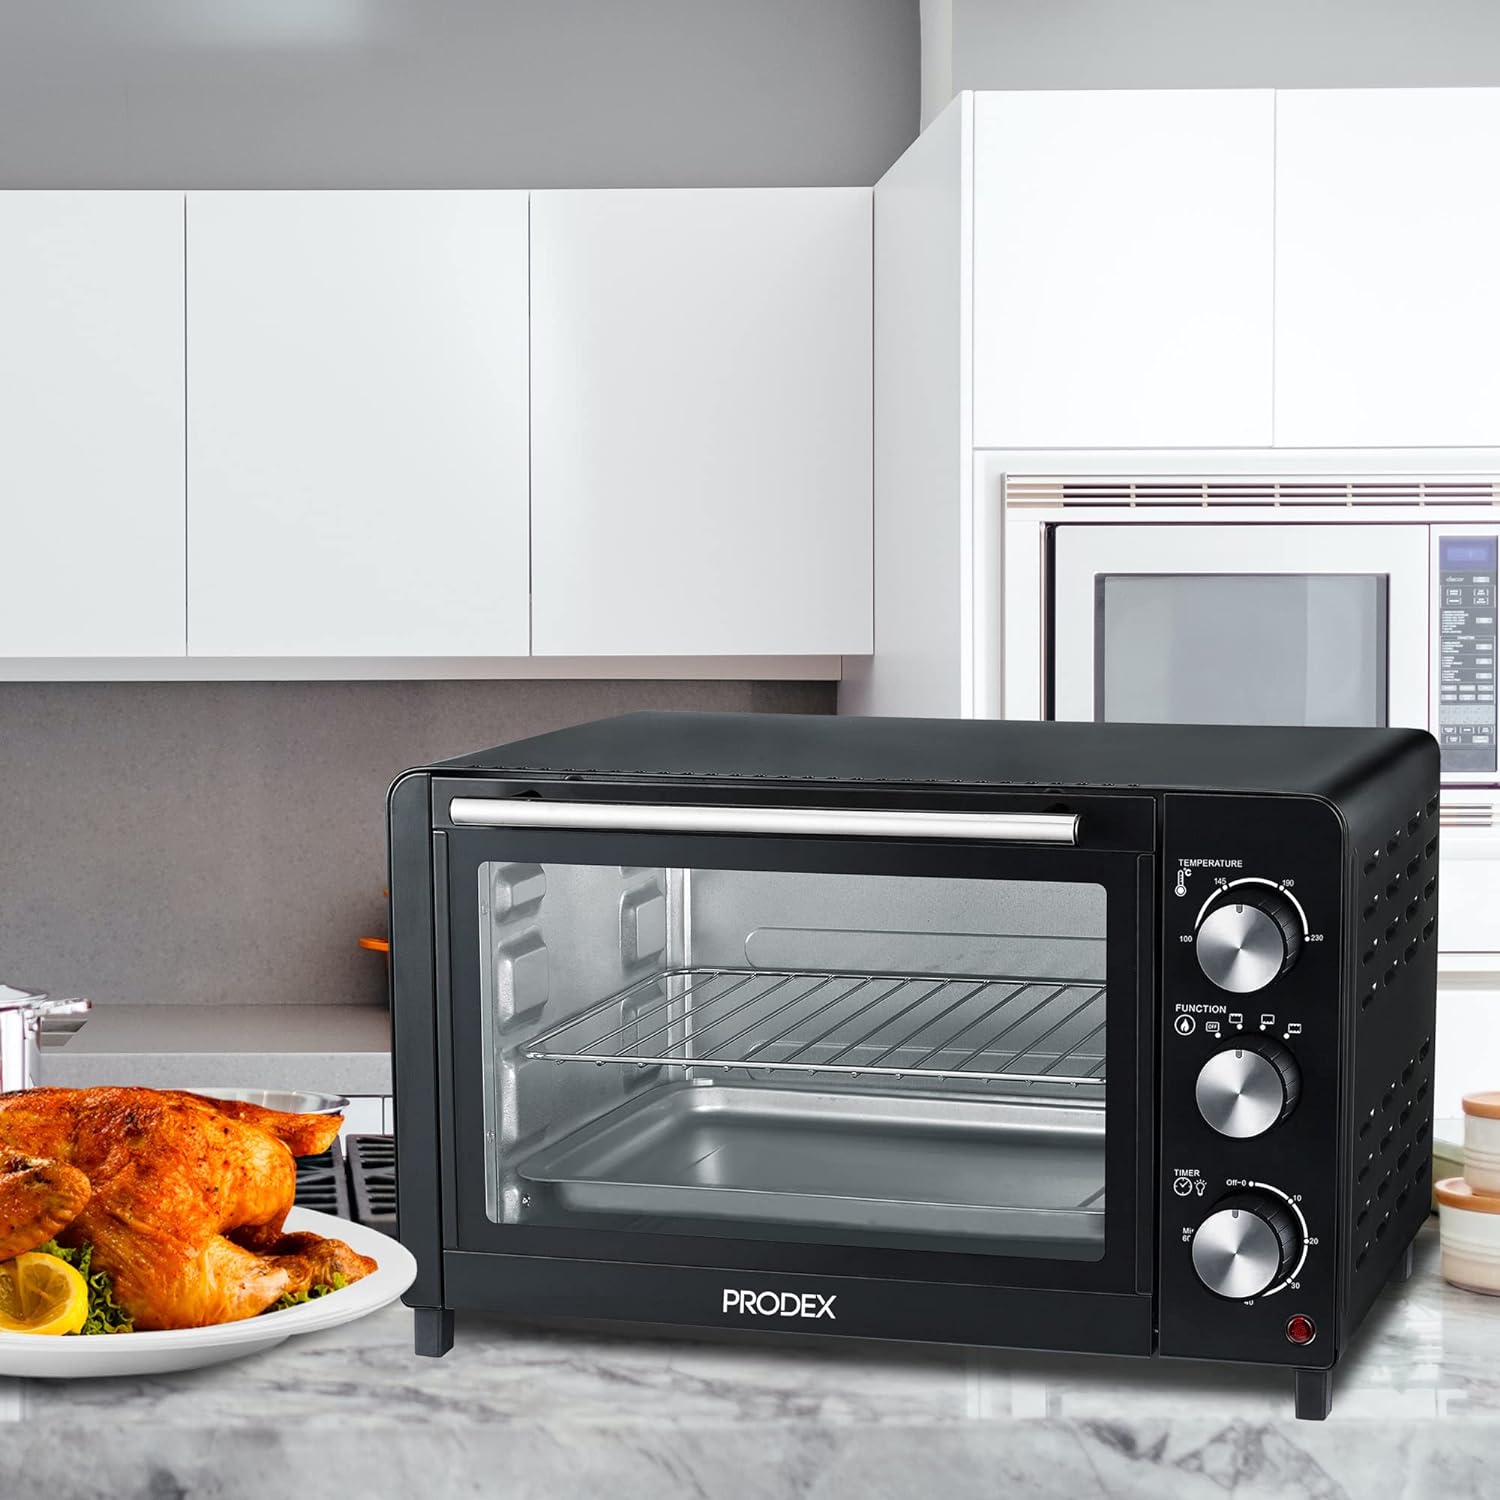 Prodex PX7023B 23 Litre Tabletop Mini Oven, 1500W Electric Cooker & Grill, Ideal for Roasting, Baking, Grilling & Reheating, Temperature Range: 100 - 230°C, Black - Amazing Gadgets Outlet